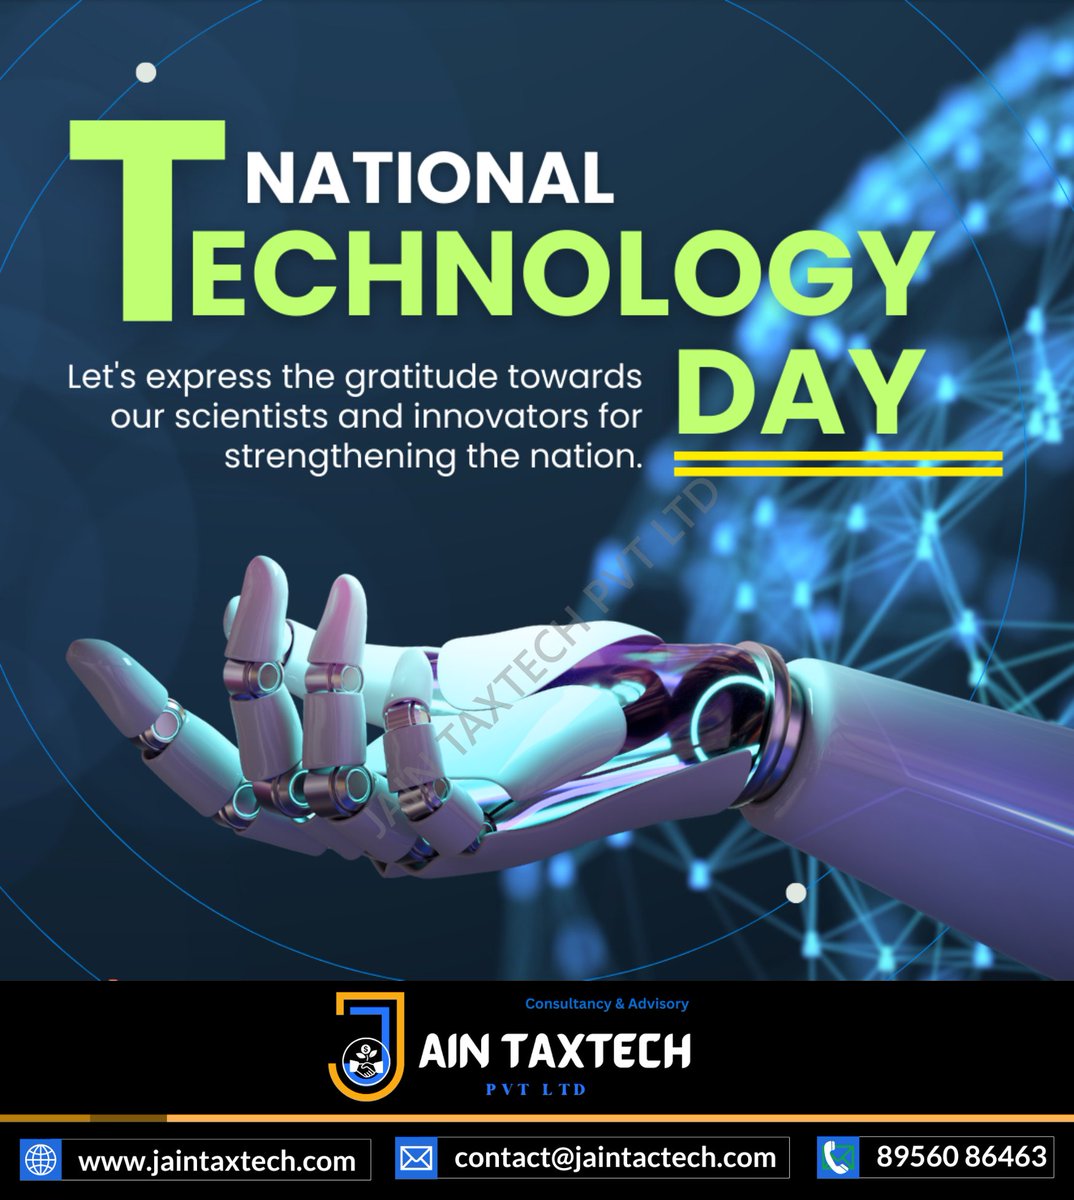 Happy National Technology Day! 🚀🔬 Celebrating Innovation, Progress, and Technological Advancements. Jain TaxTech Salutes the Spirit of Discovery and Ingenuity! 💼💡 #NationalTechnologyDay #Innovation #JainTaxTech #FutureTech #TechTrends #AccountingServices #FinancialConsulting